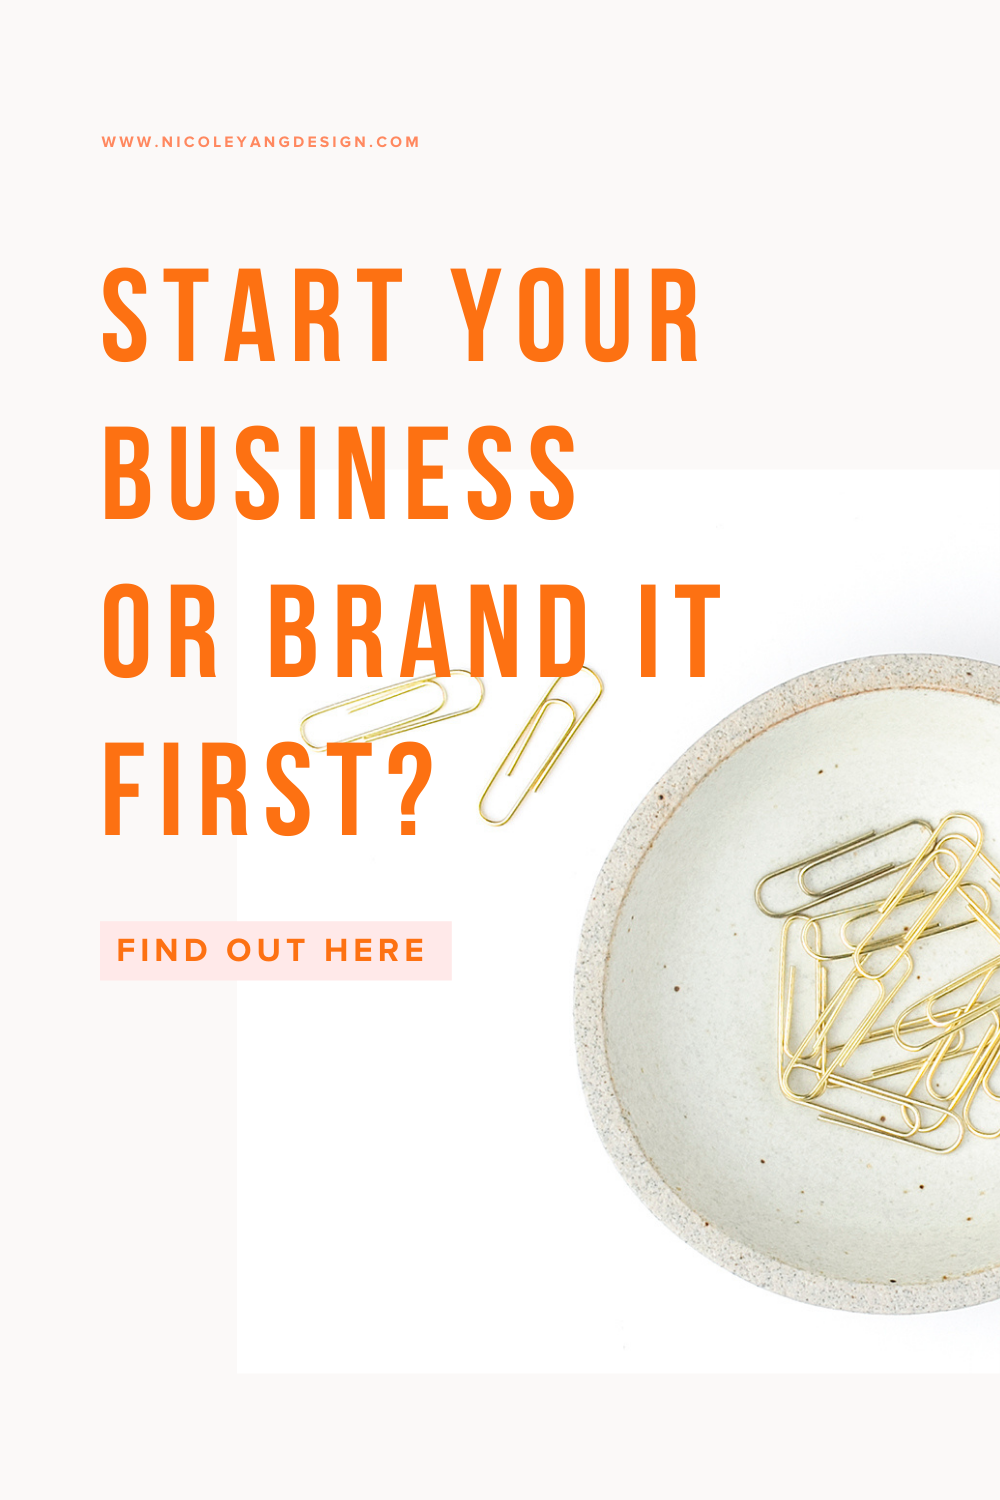 When Do You Need Design for a New Business? | The Design Lab